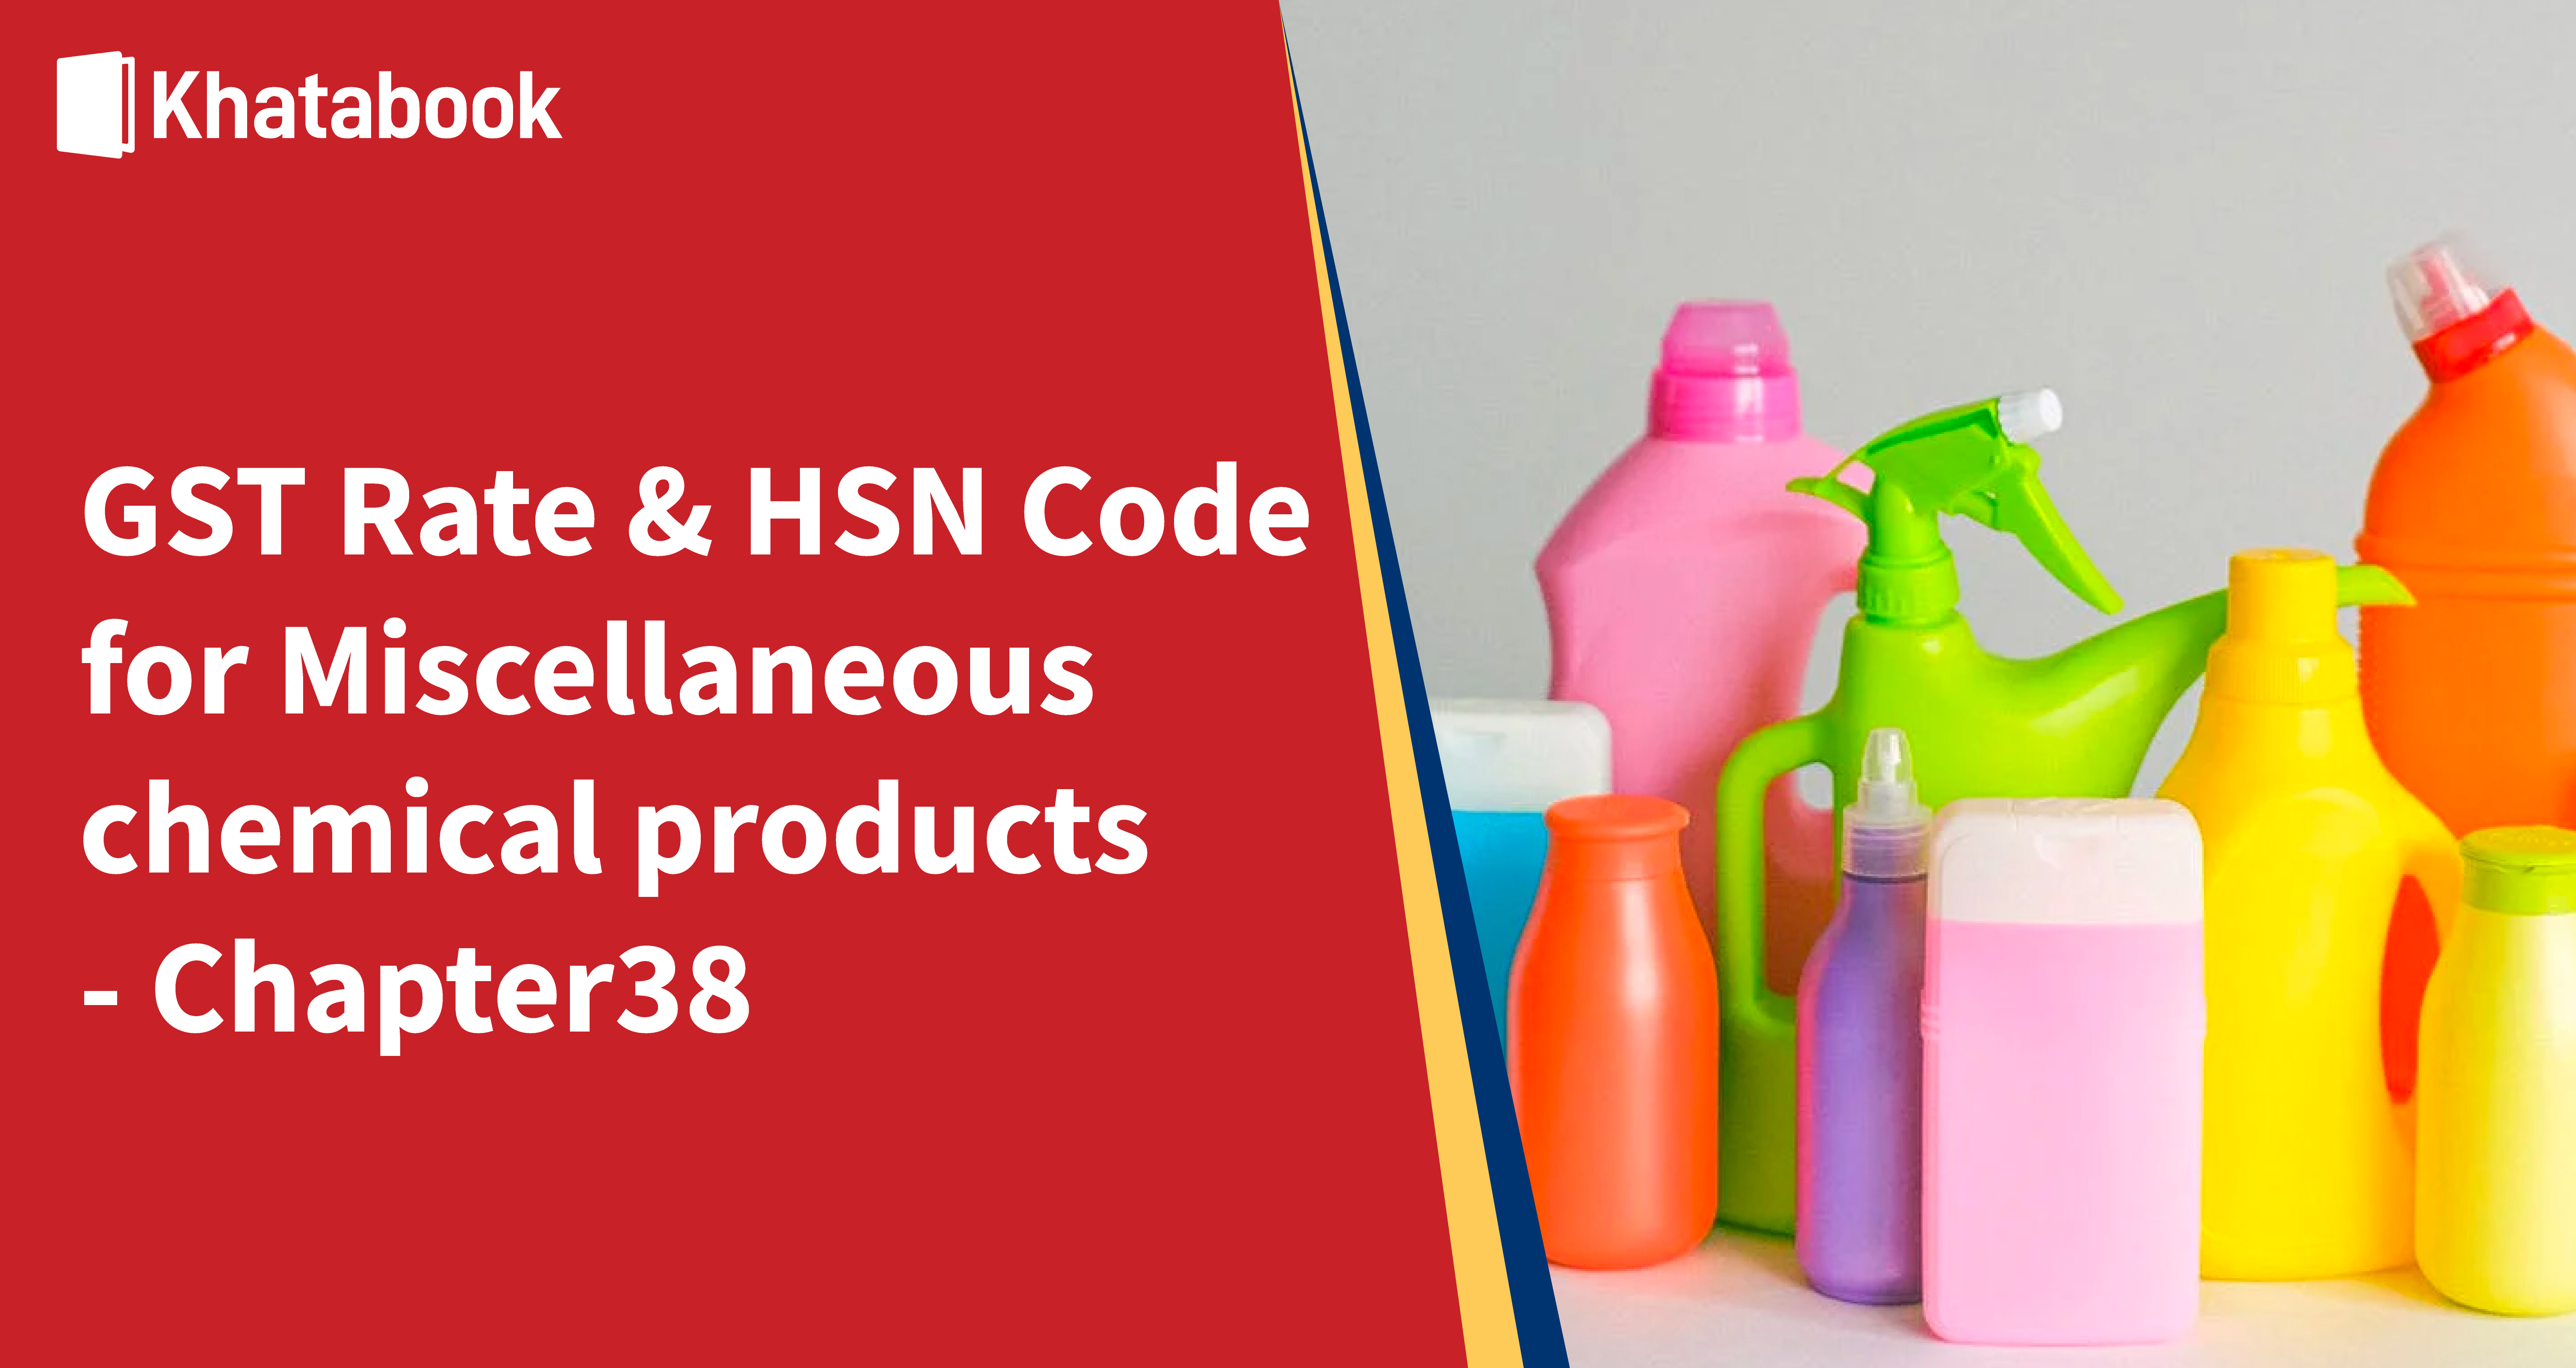 acid hsn code and gst rate